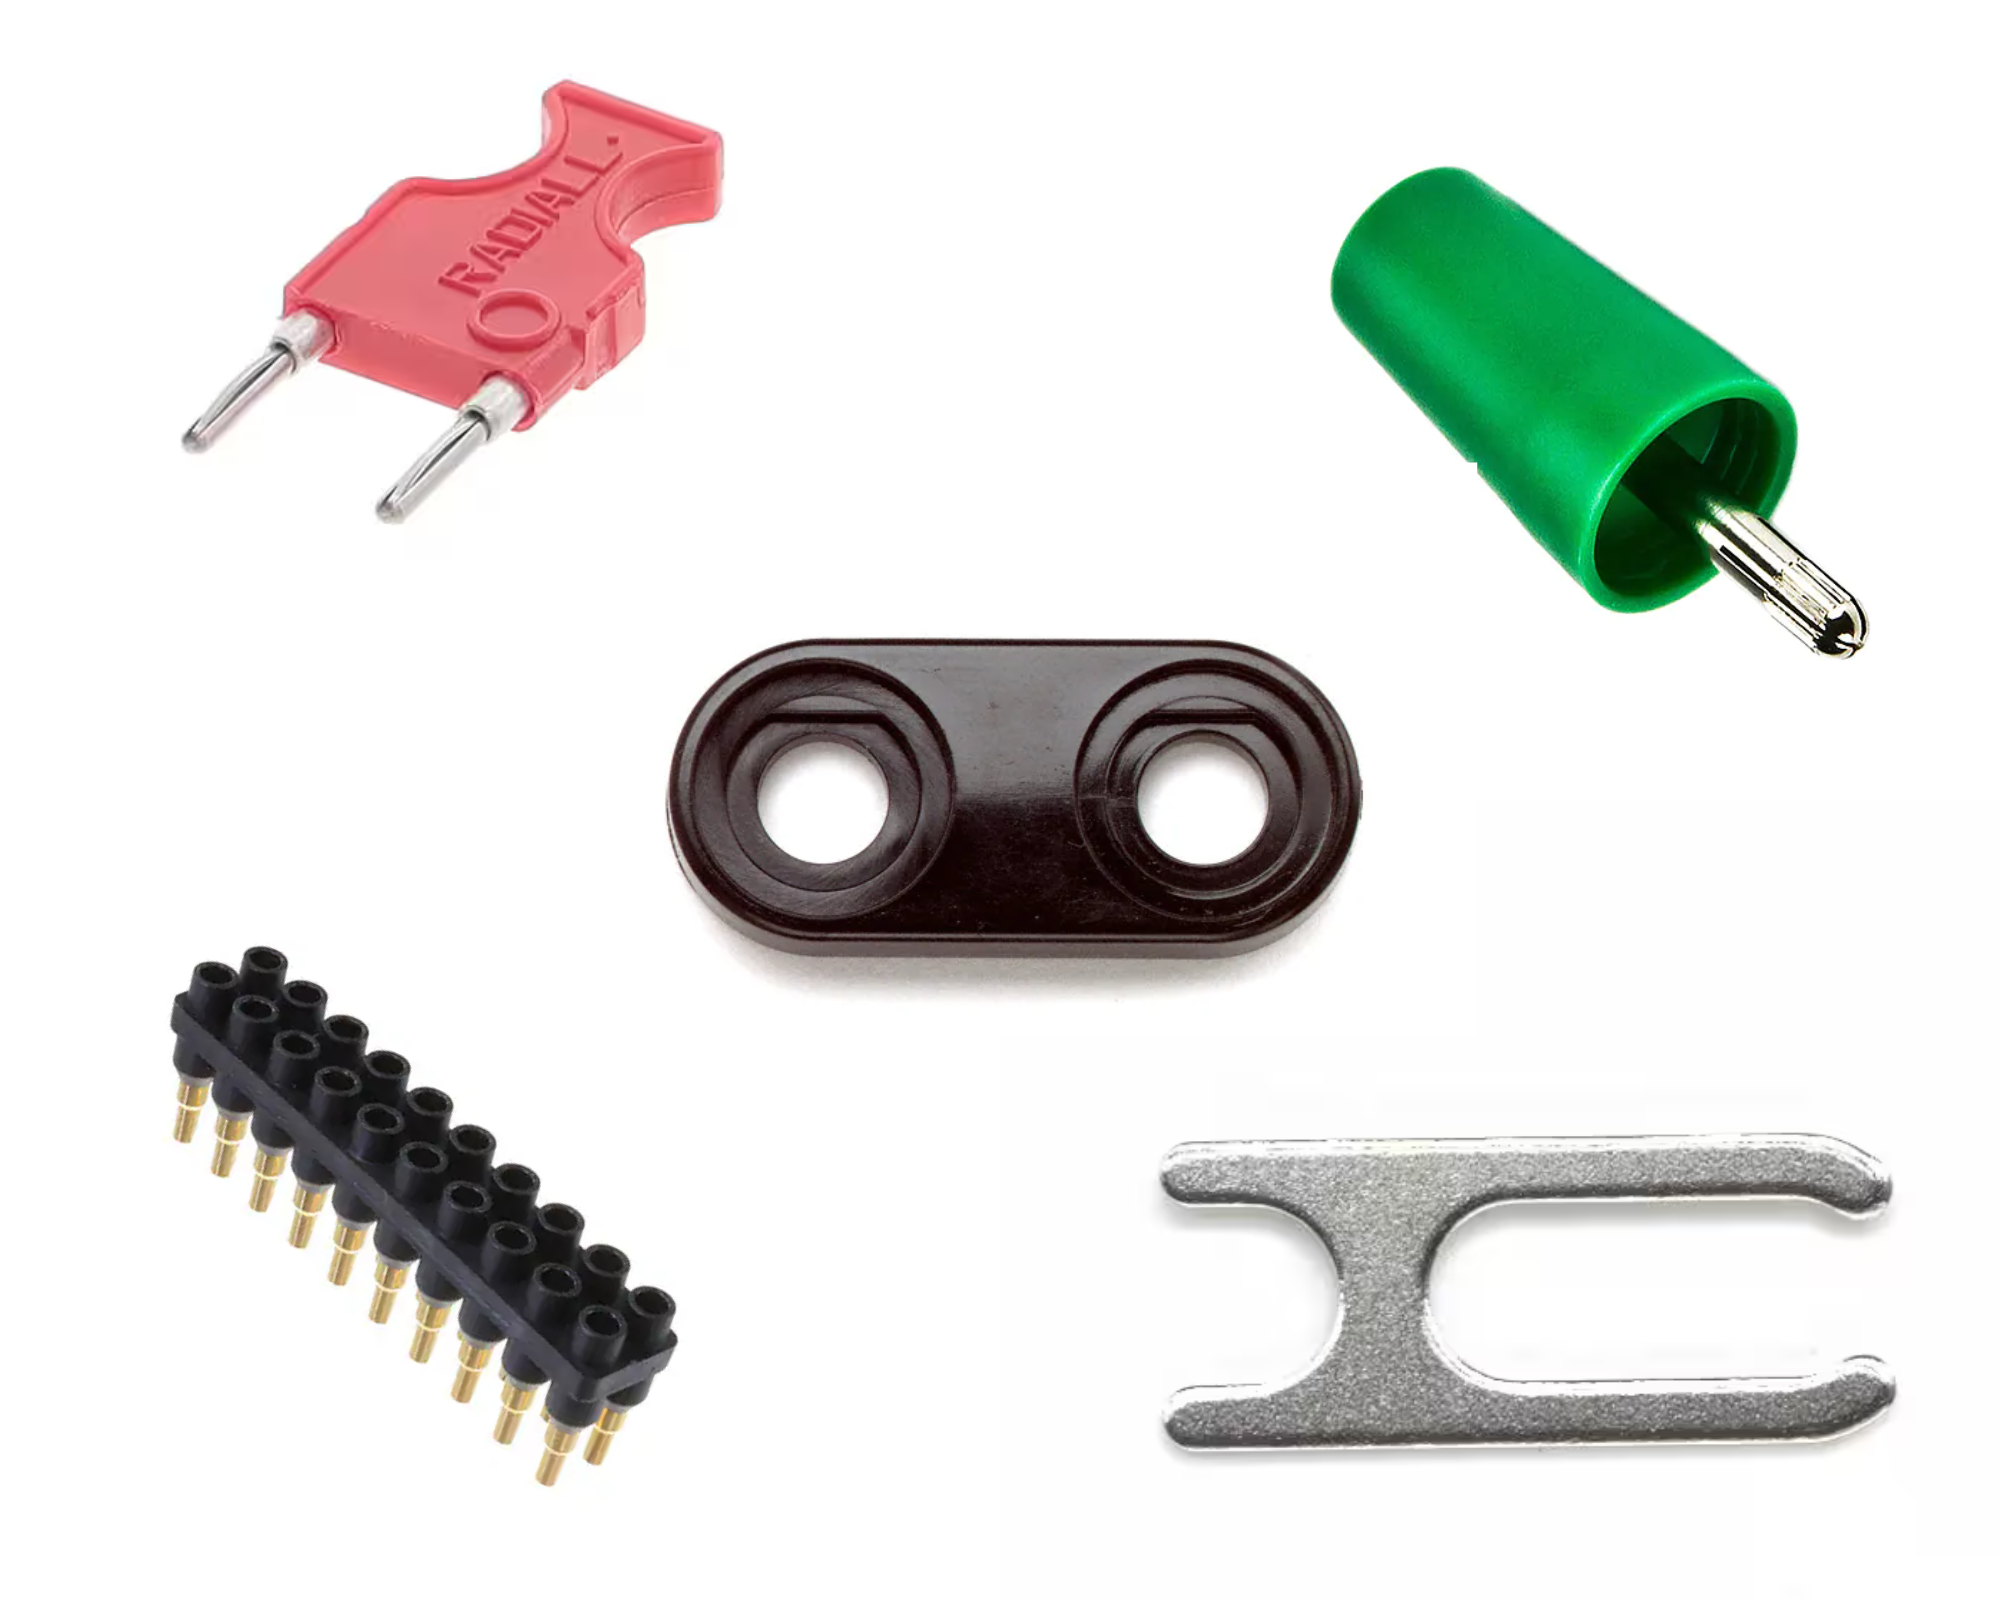 Banana and Tip Connectors - Accessories